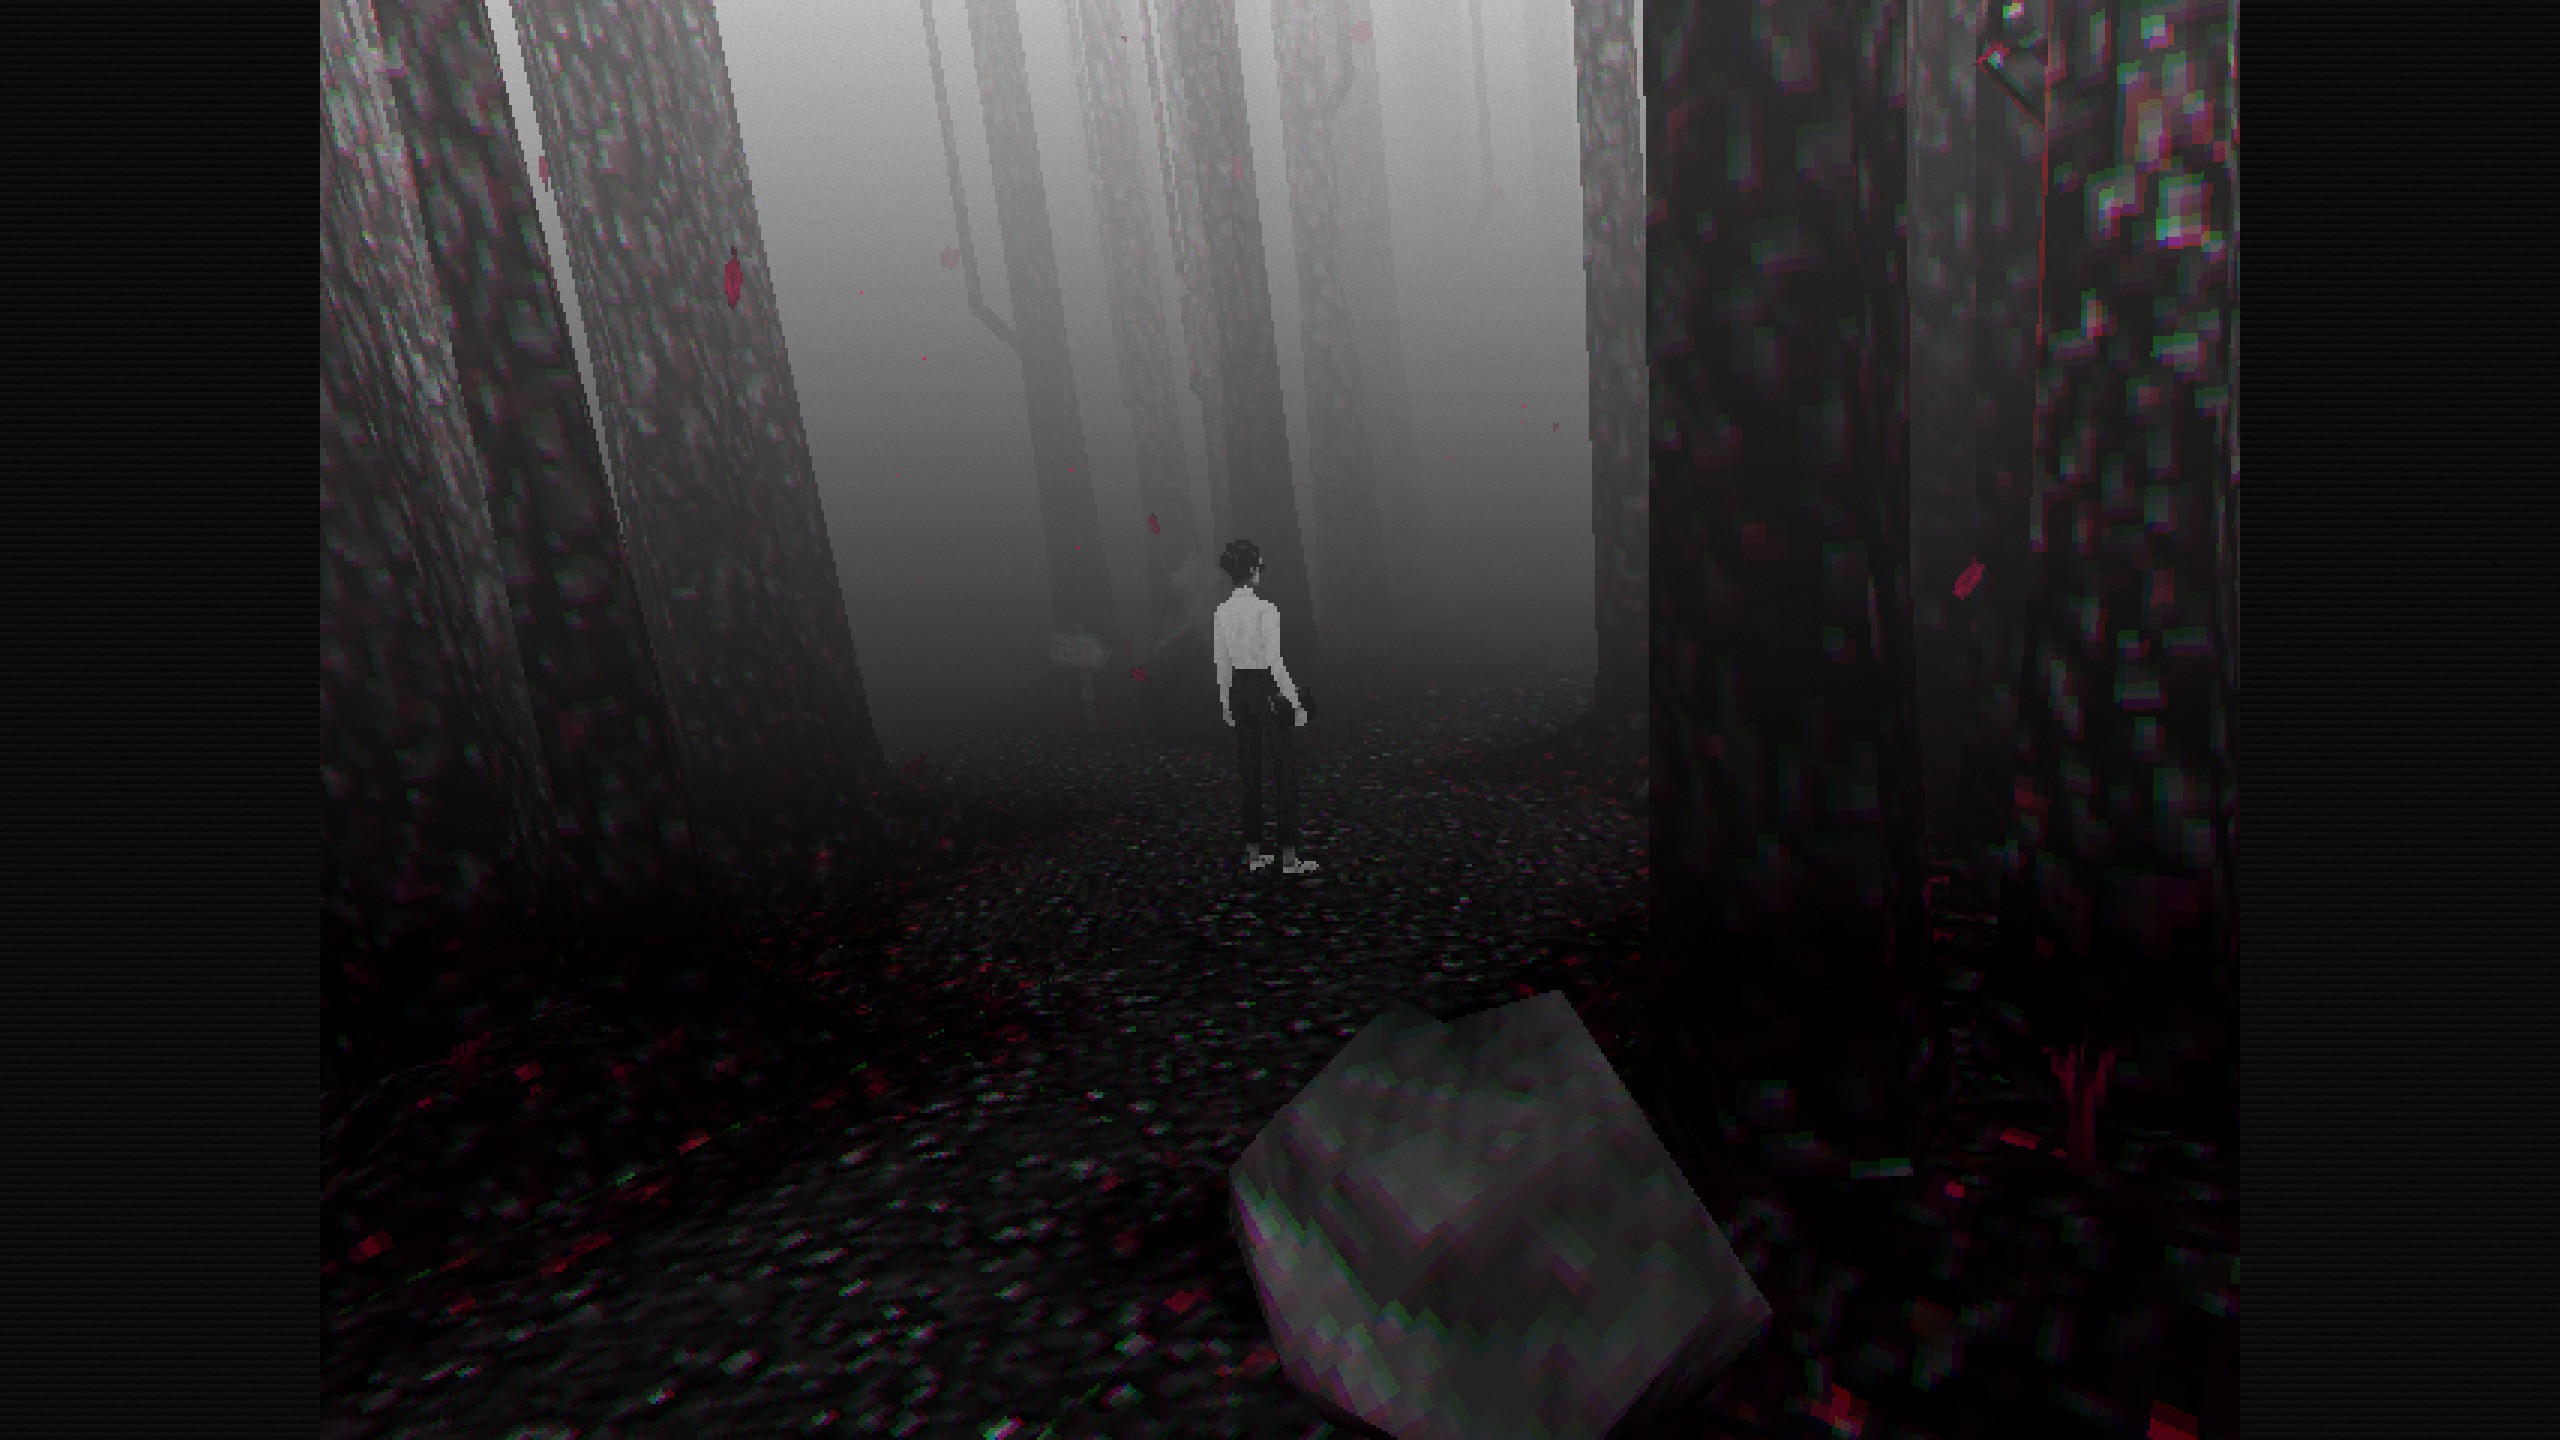 A PS1-styled woman stands in a dark wood